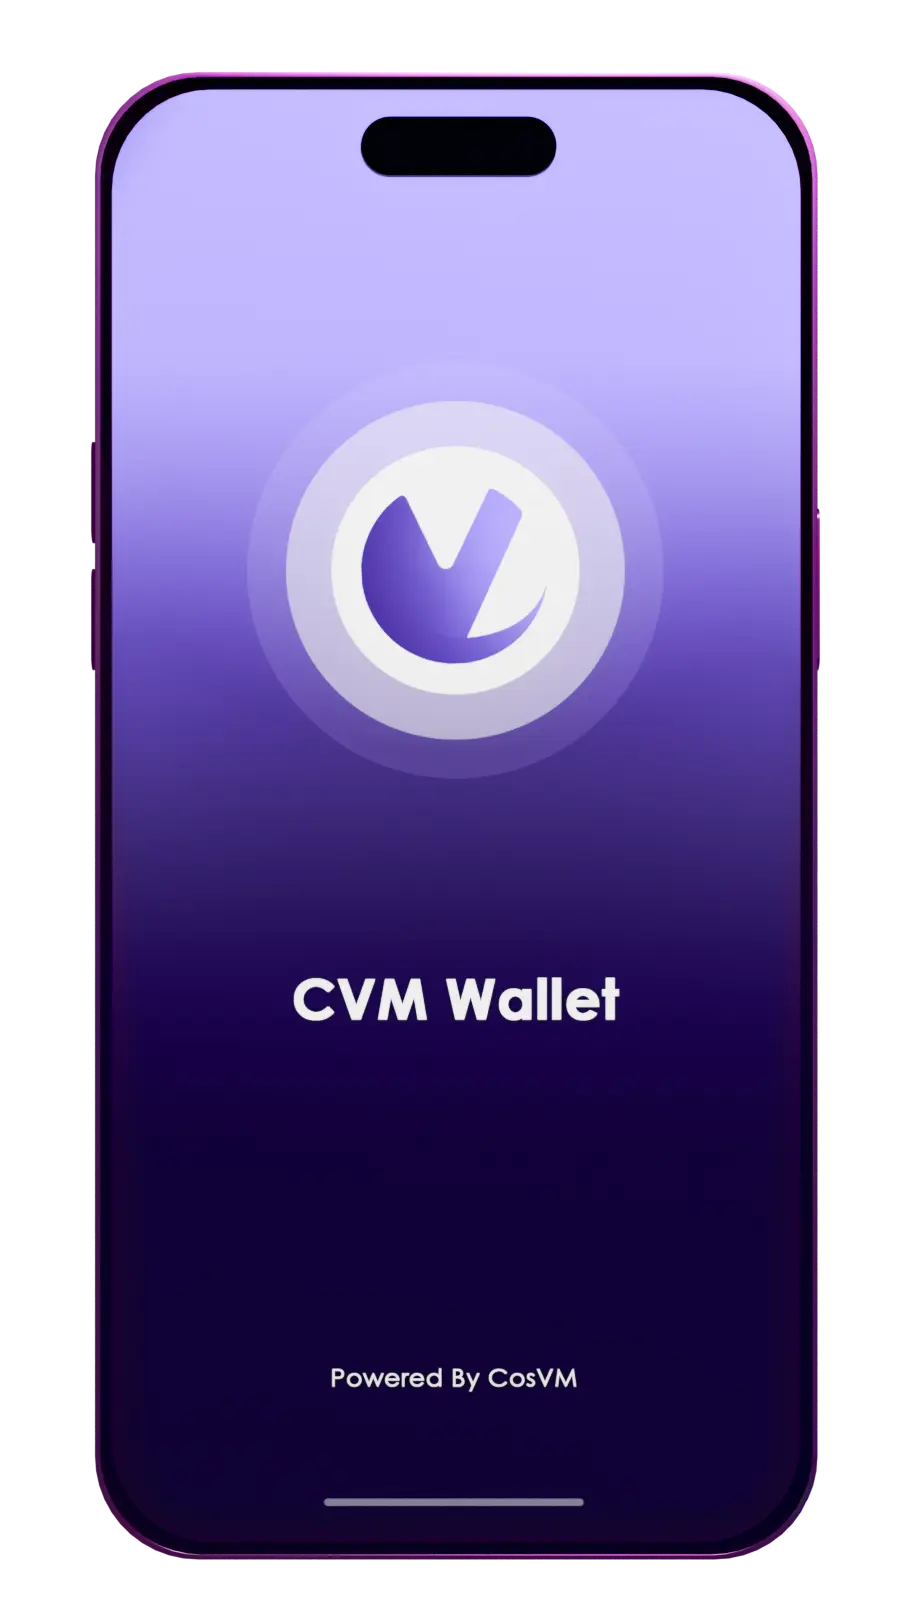 Features of CVM Wallet